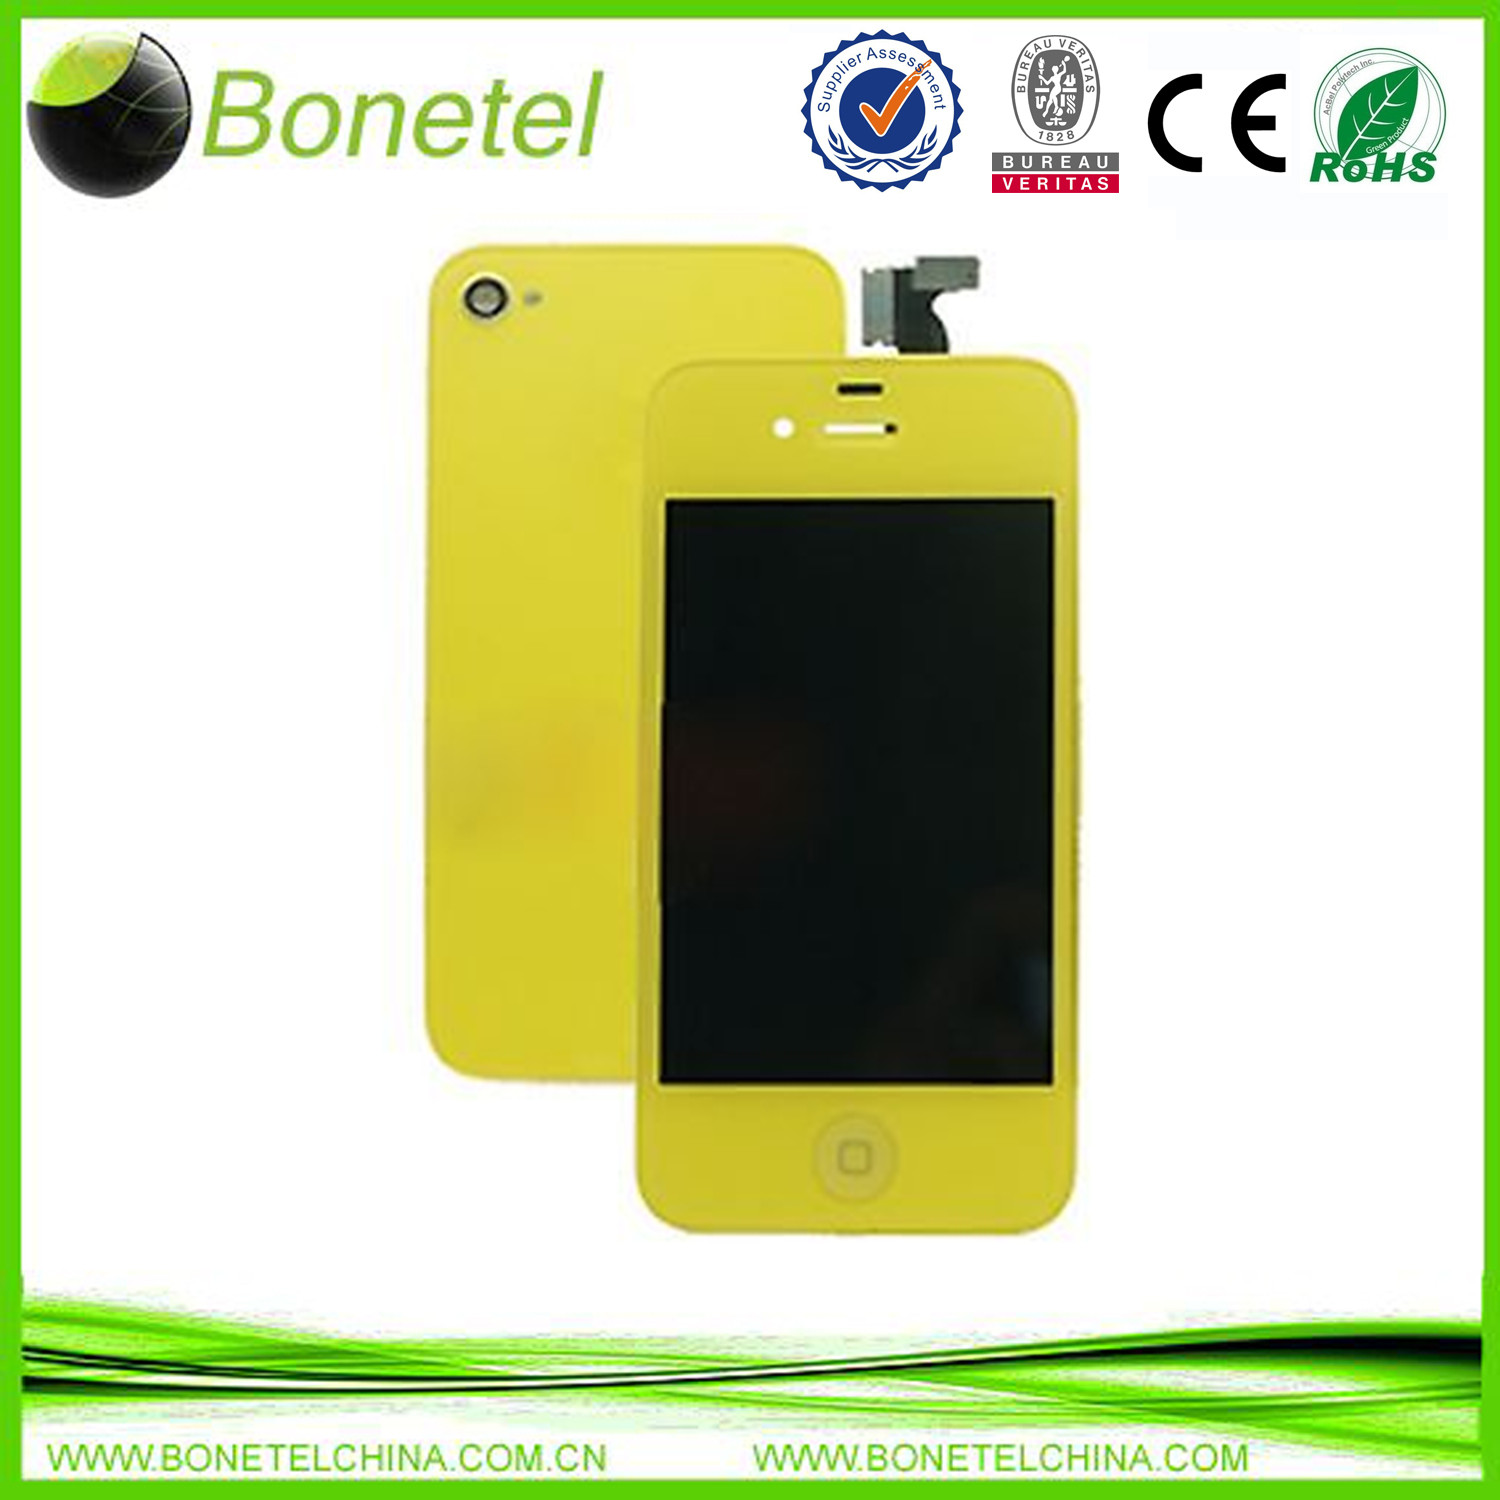 Yellow LCD Touch Screen Digitizer Replacement Assembly for iPhone 4S GSM